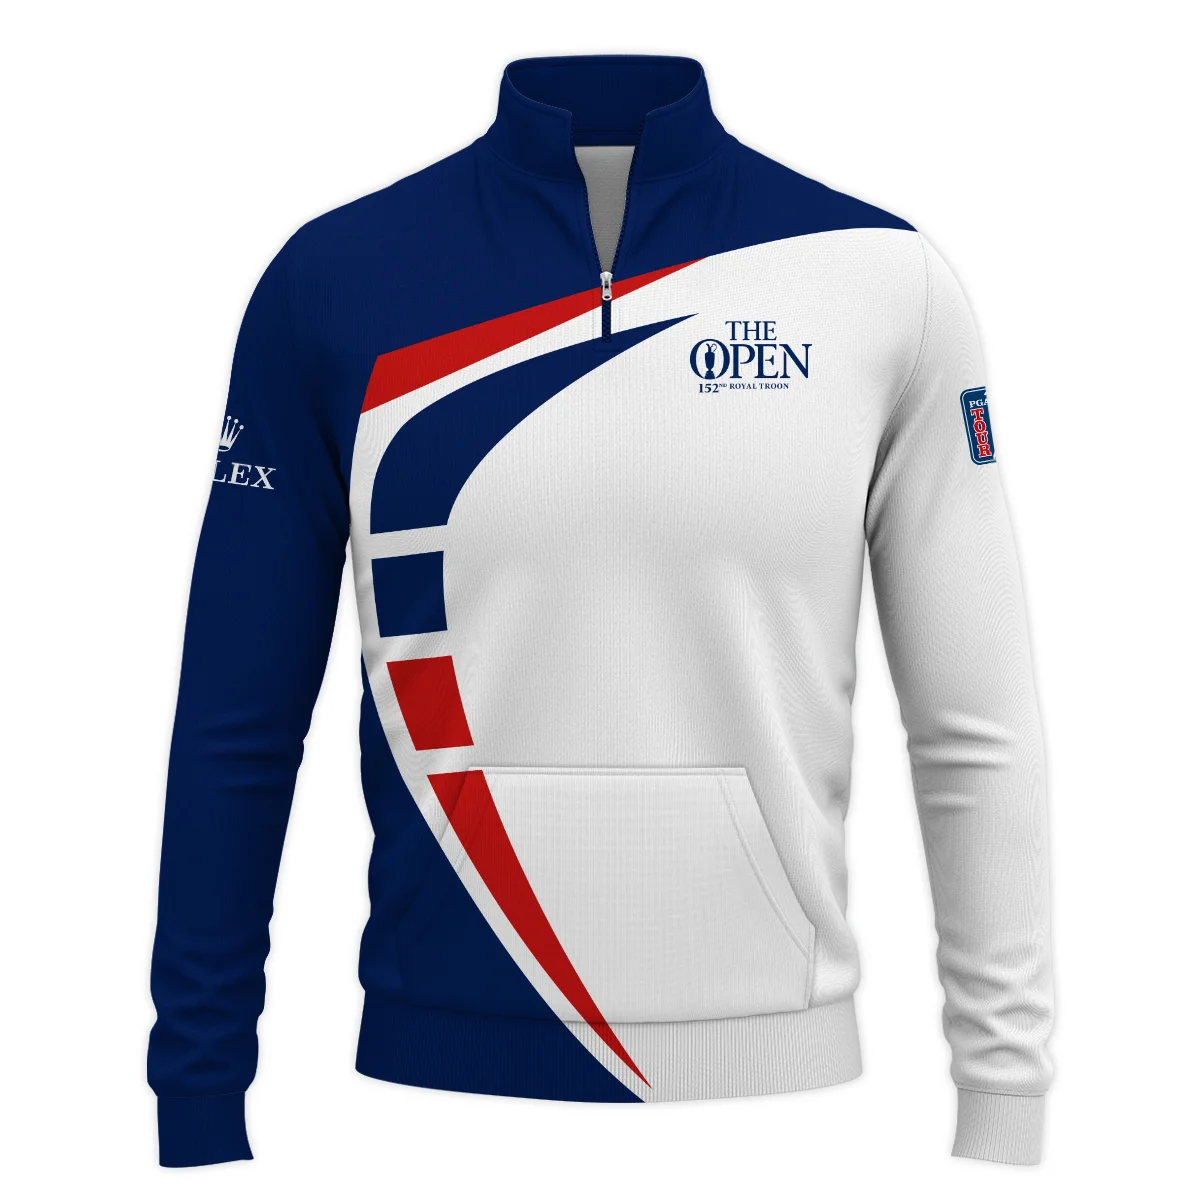 152nd Open Championship Rolex White Blue Red Pattern Background Performance Quarter Zip Sweatshirt With Pockets All Over Prints HOTOP270624A03ROXTS